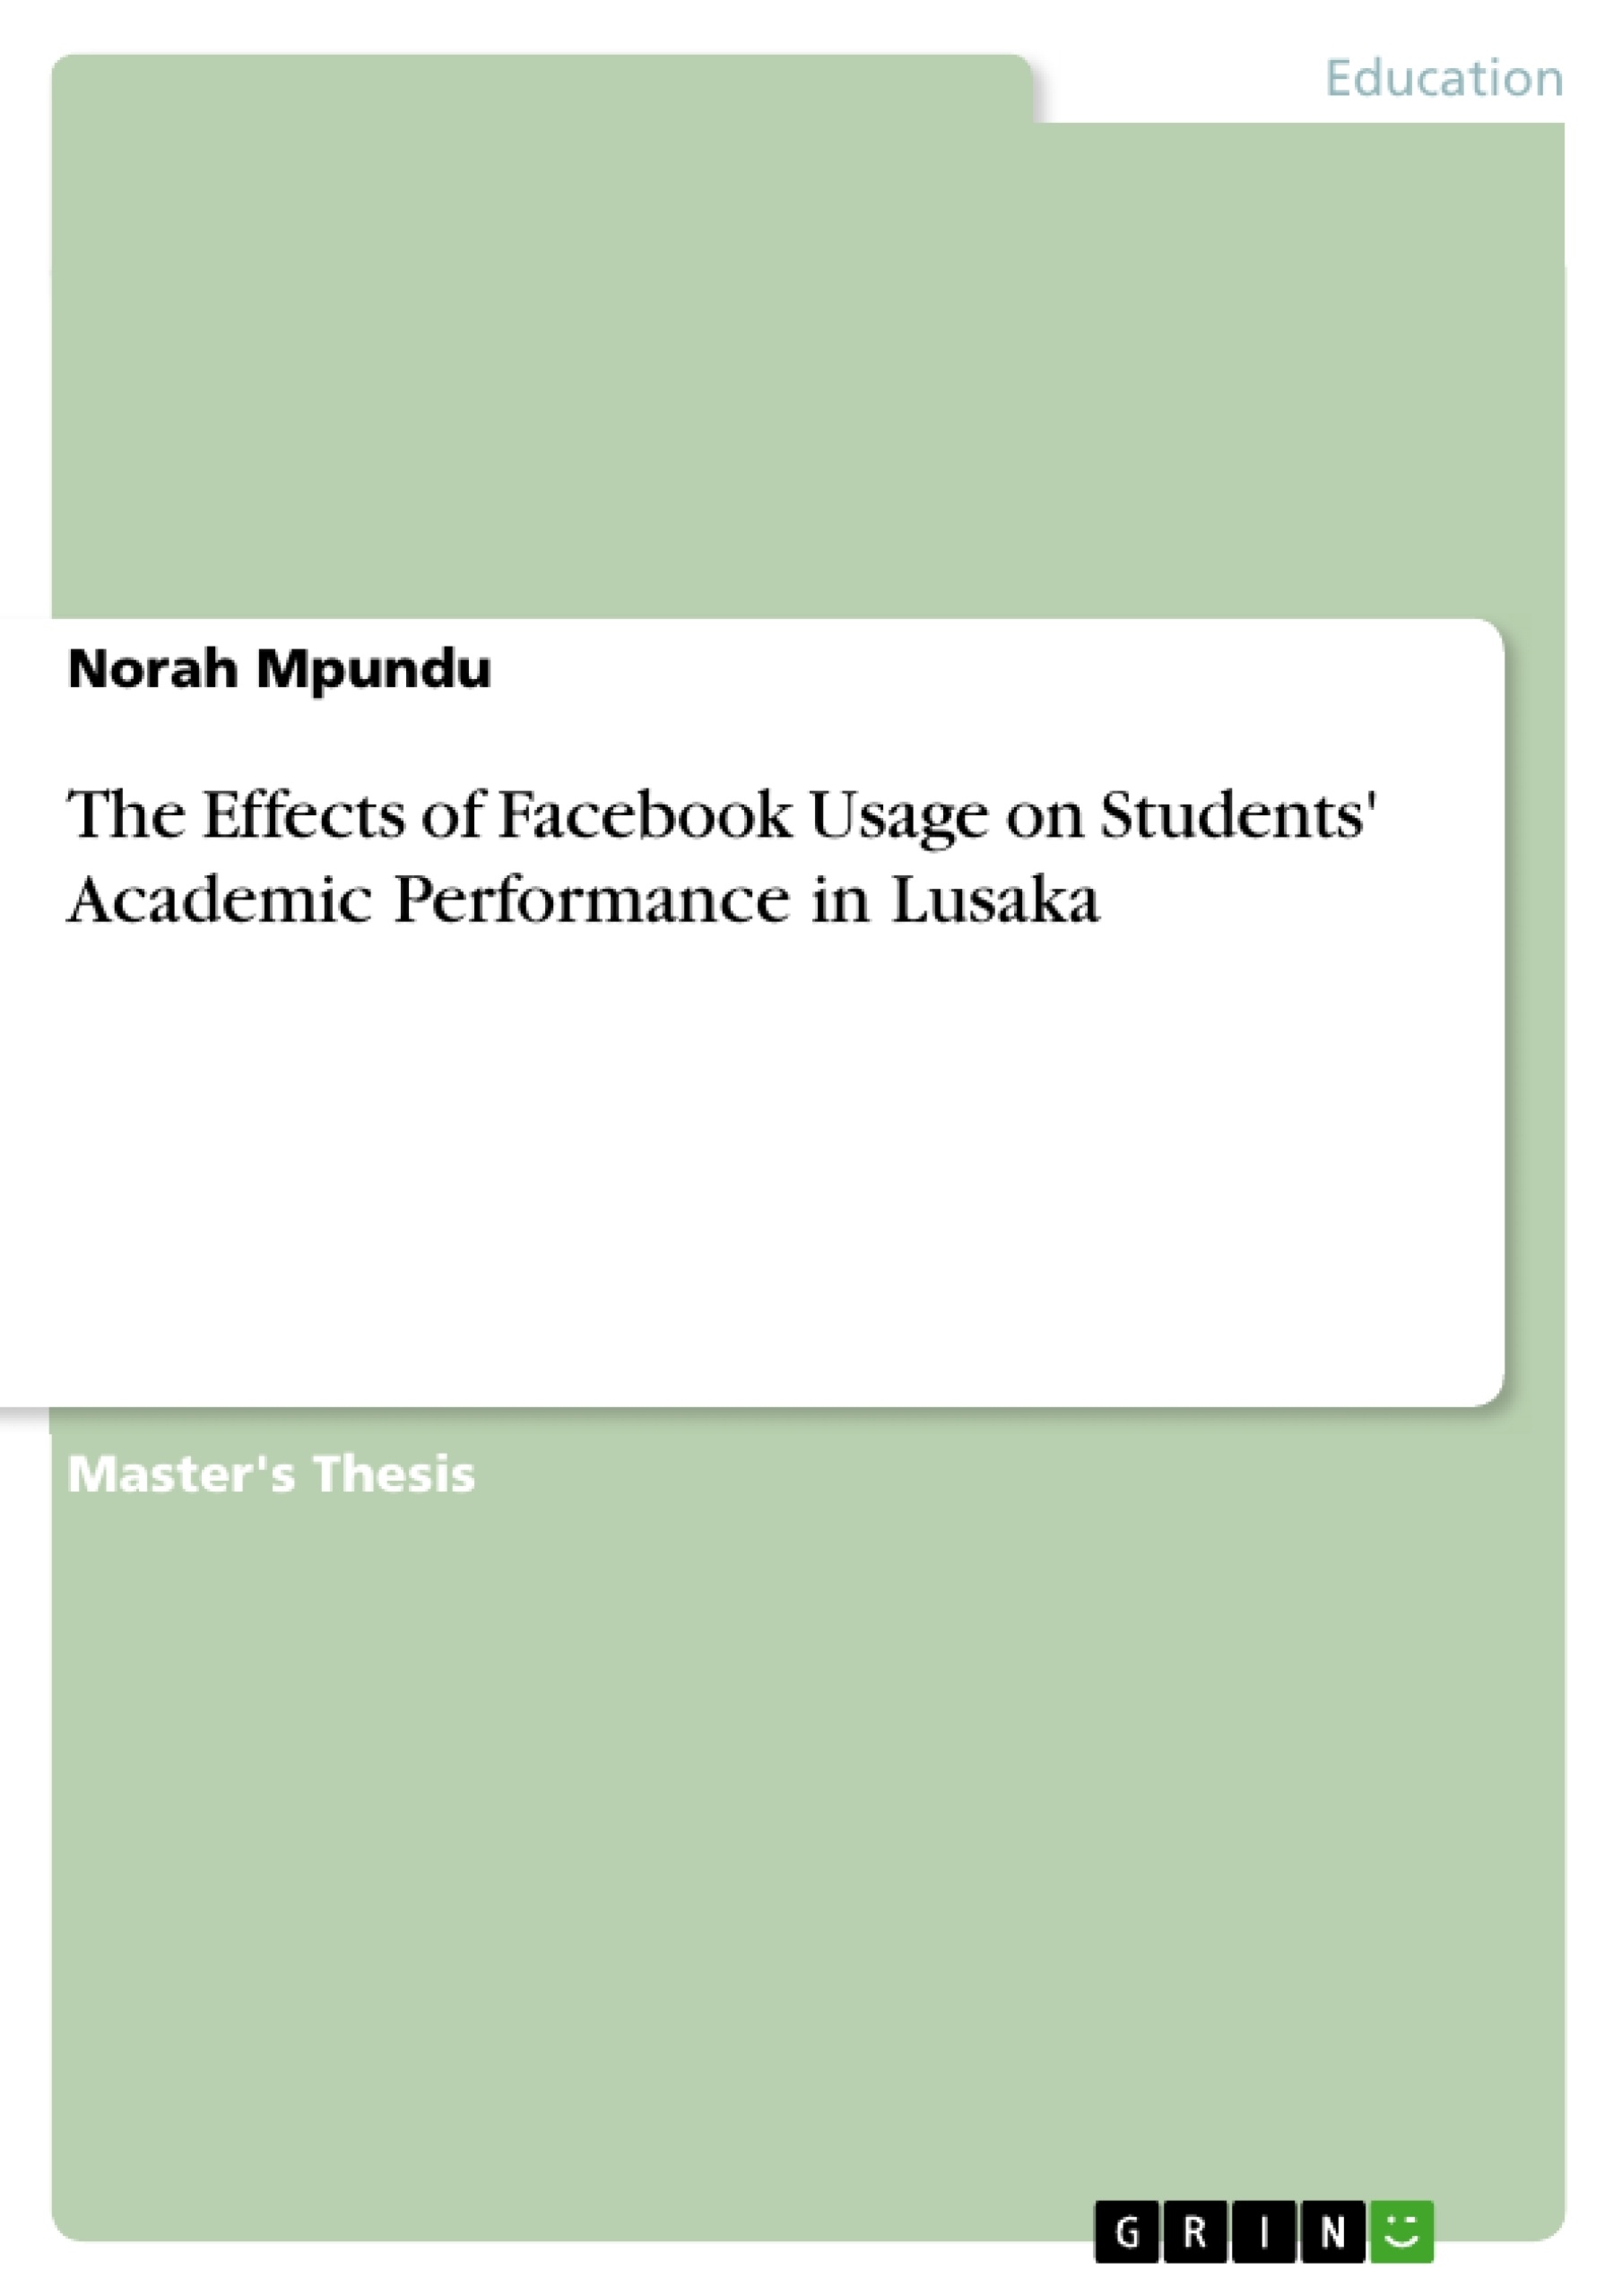 Título: The Effects of Facebook Usage on Students' Academic Performance in Lusaka